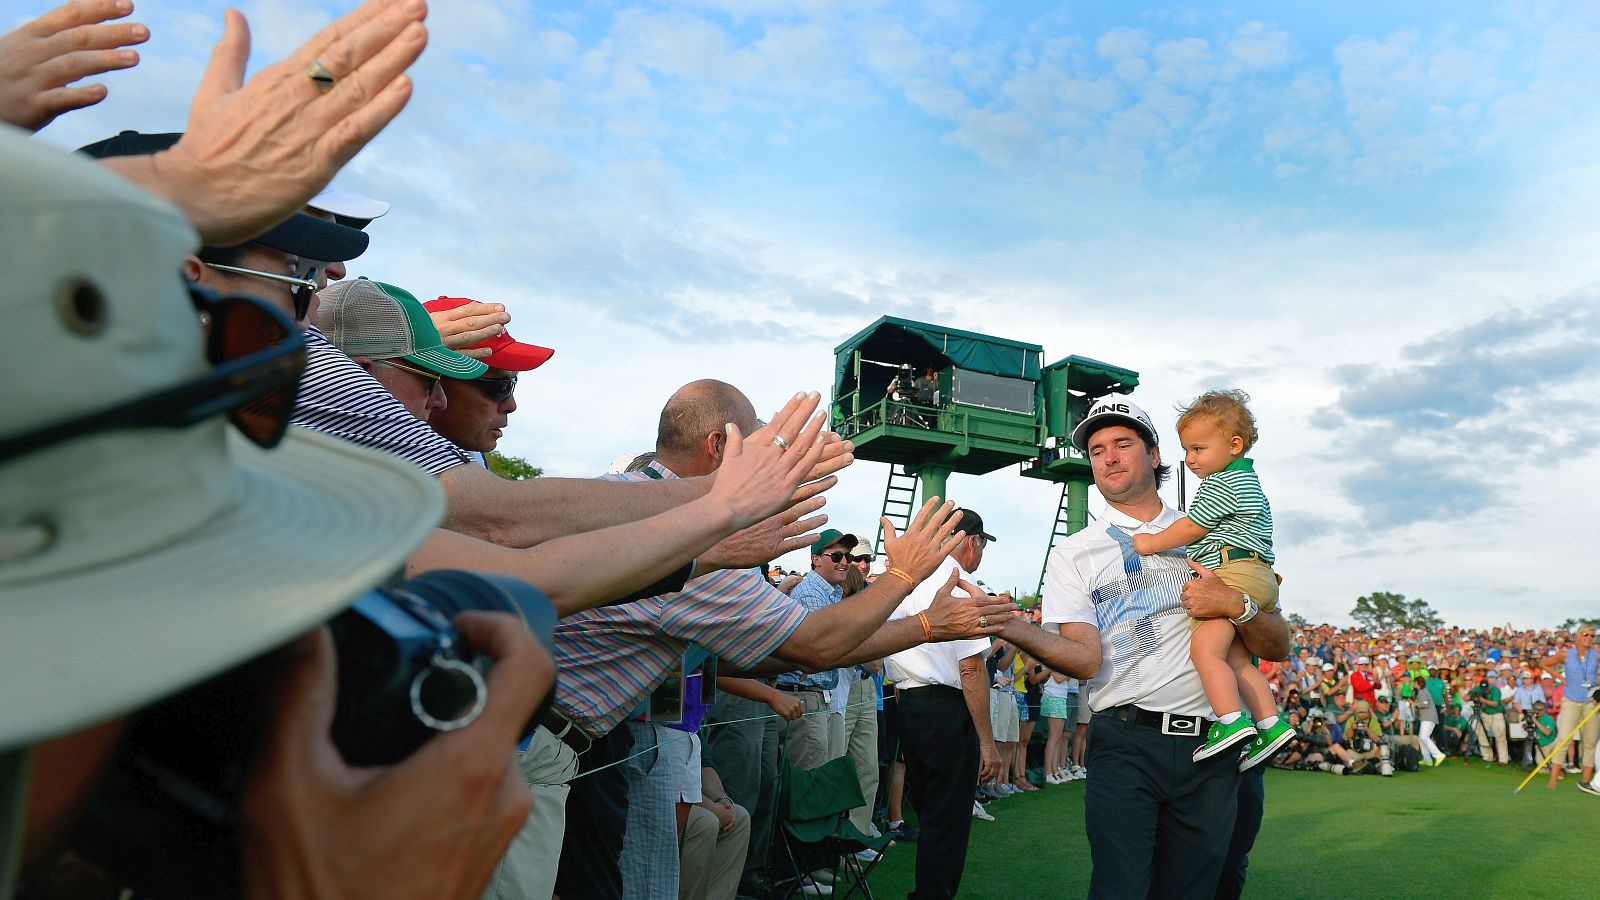 The 2014 Masters: Bubba Watson / USA © Augusta National / Getty Images